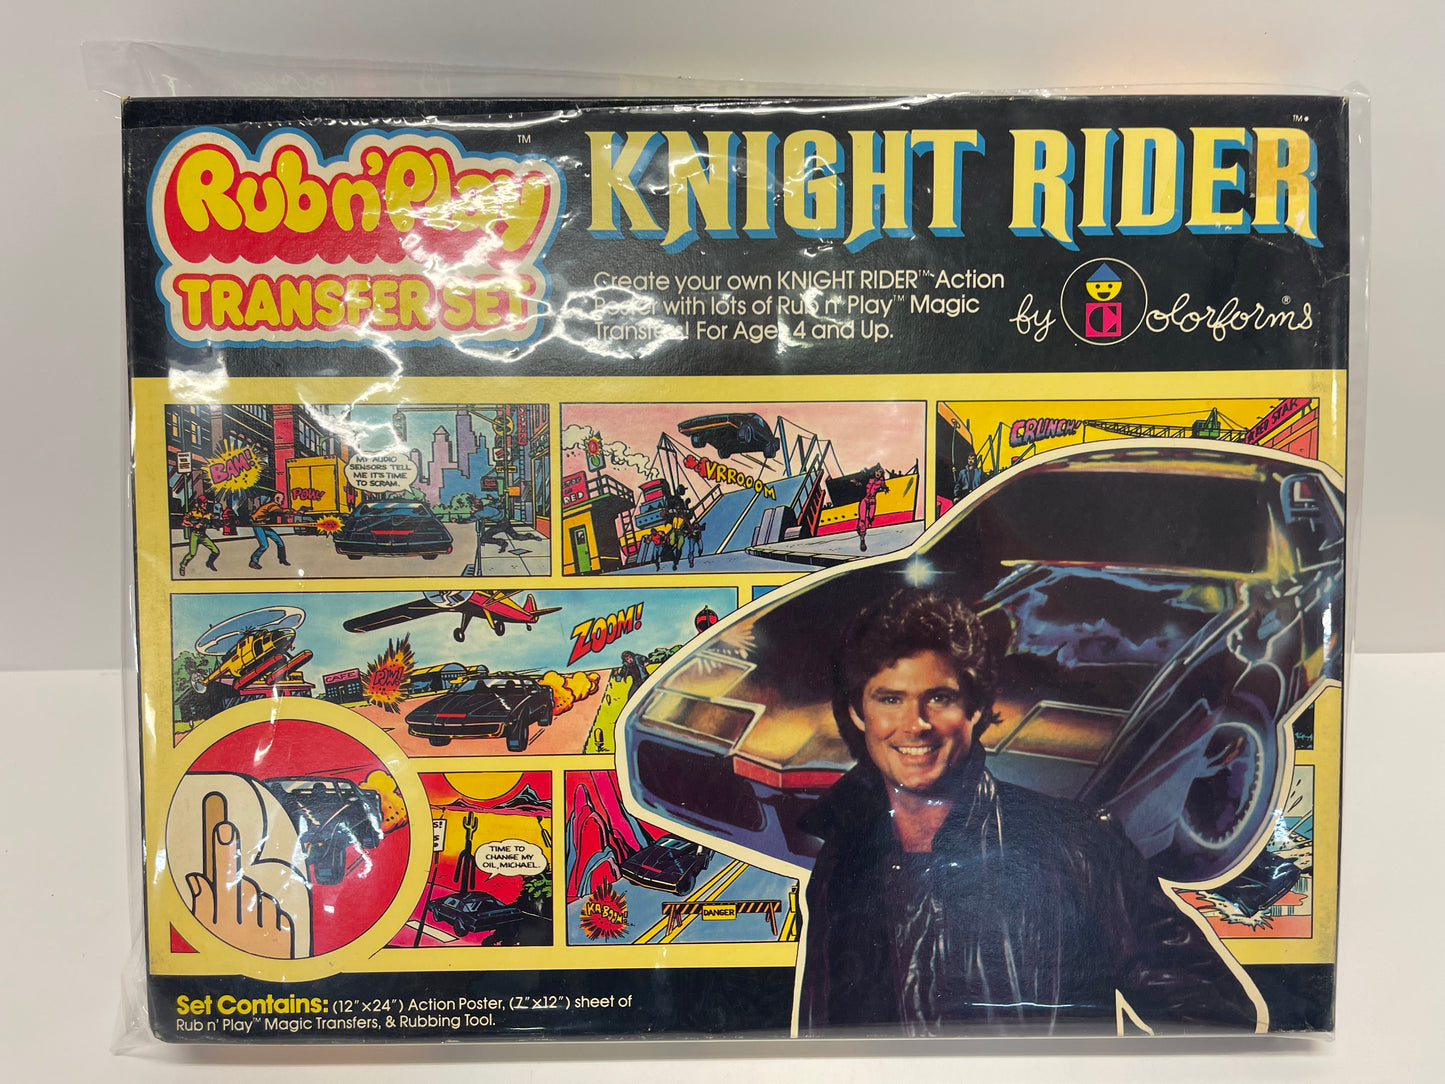 Knight Rider Rub n Play Transfer Set by Colorforms Sealed from 1982!